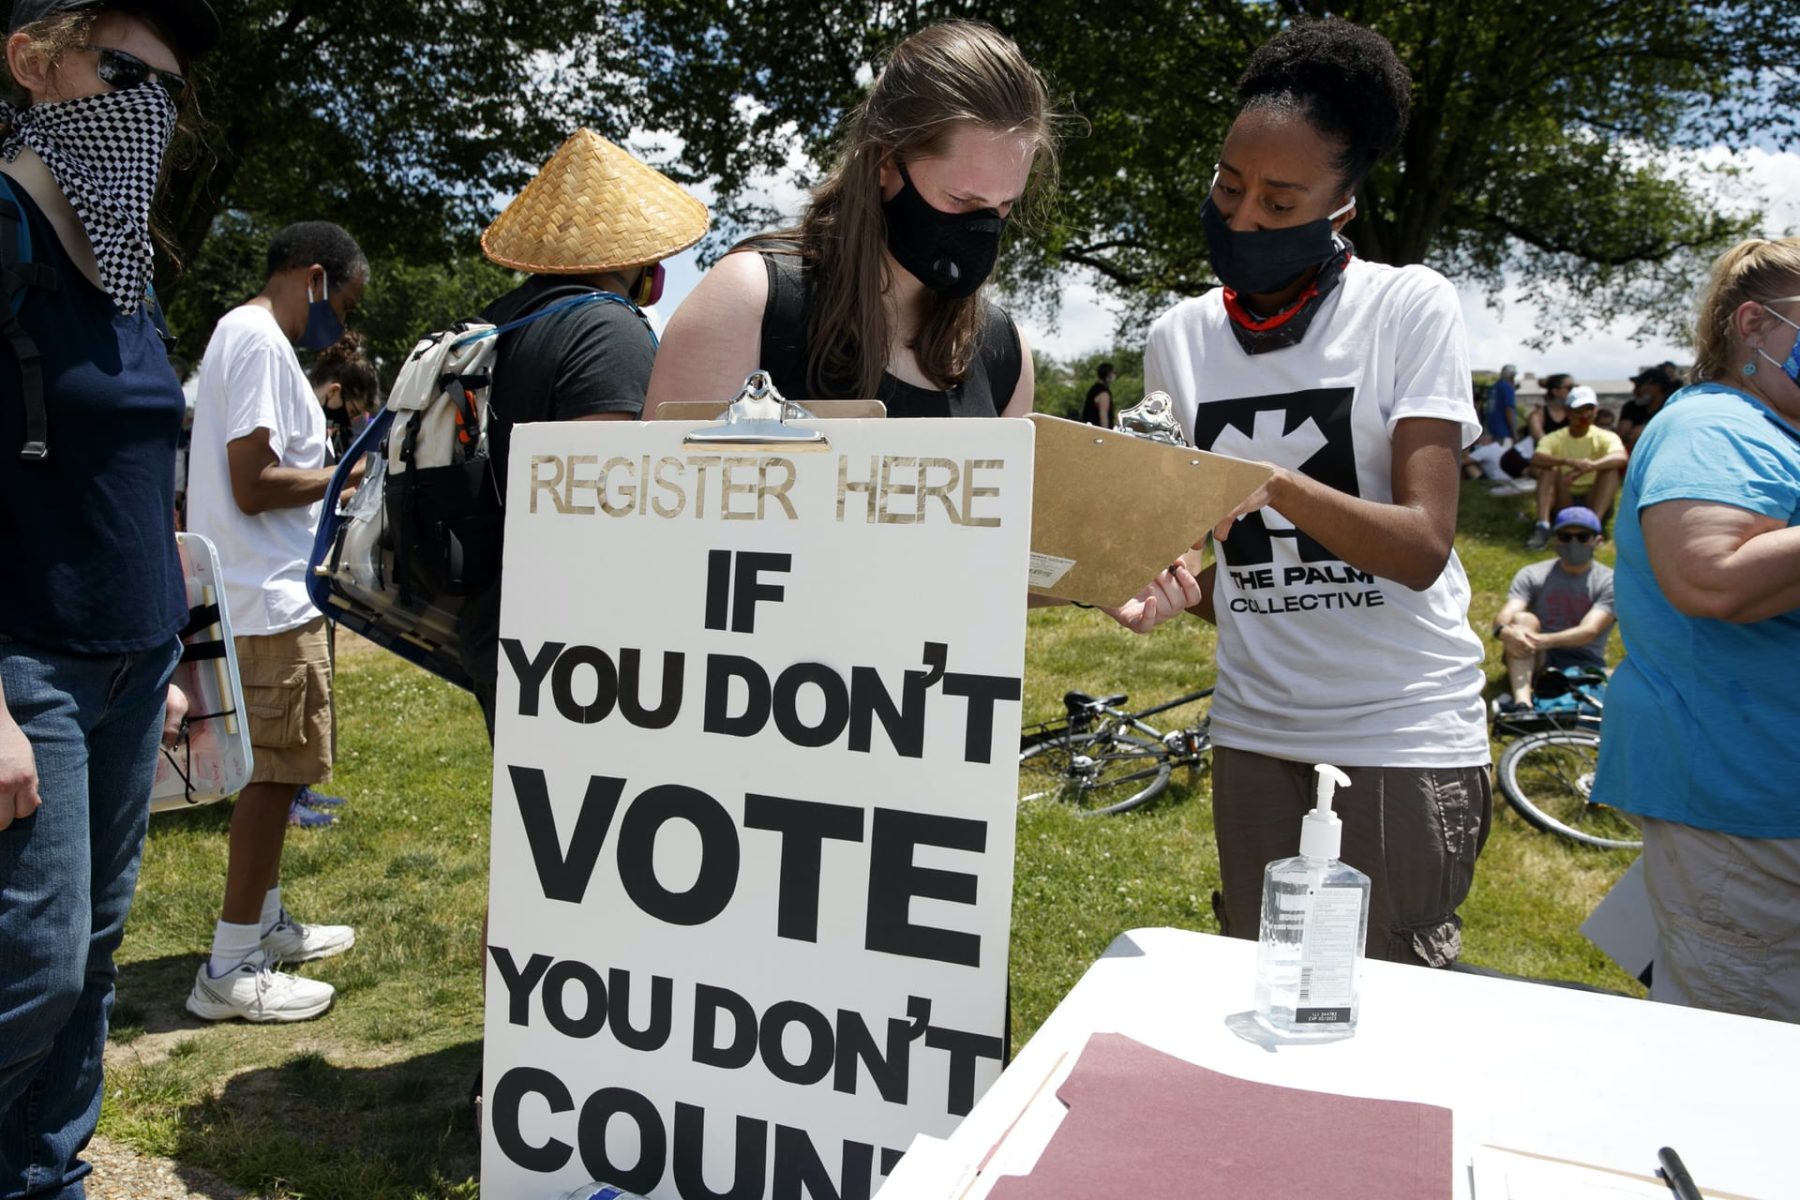 Birdie Addison, 18, of Germantown, Md., left, registers to vote for the first time while being helped by Kysten Thomas, of Washington, ahead of a march from the National Museum of African American History and Culture to the Lincoln Memorial, in Washington on Friday, June 19, 2020, to mark Juneteenth, the holiday celebrating the day in 1865 that enslaved black people in Galveston, Texas, learned they had been freed from bondage, more than two years after the Emancipation Proclamation. (AP Photo/Jacquelyn Martin)